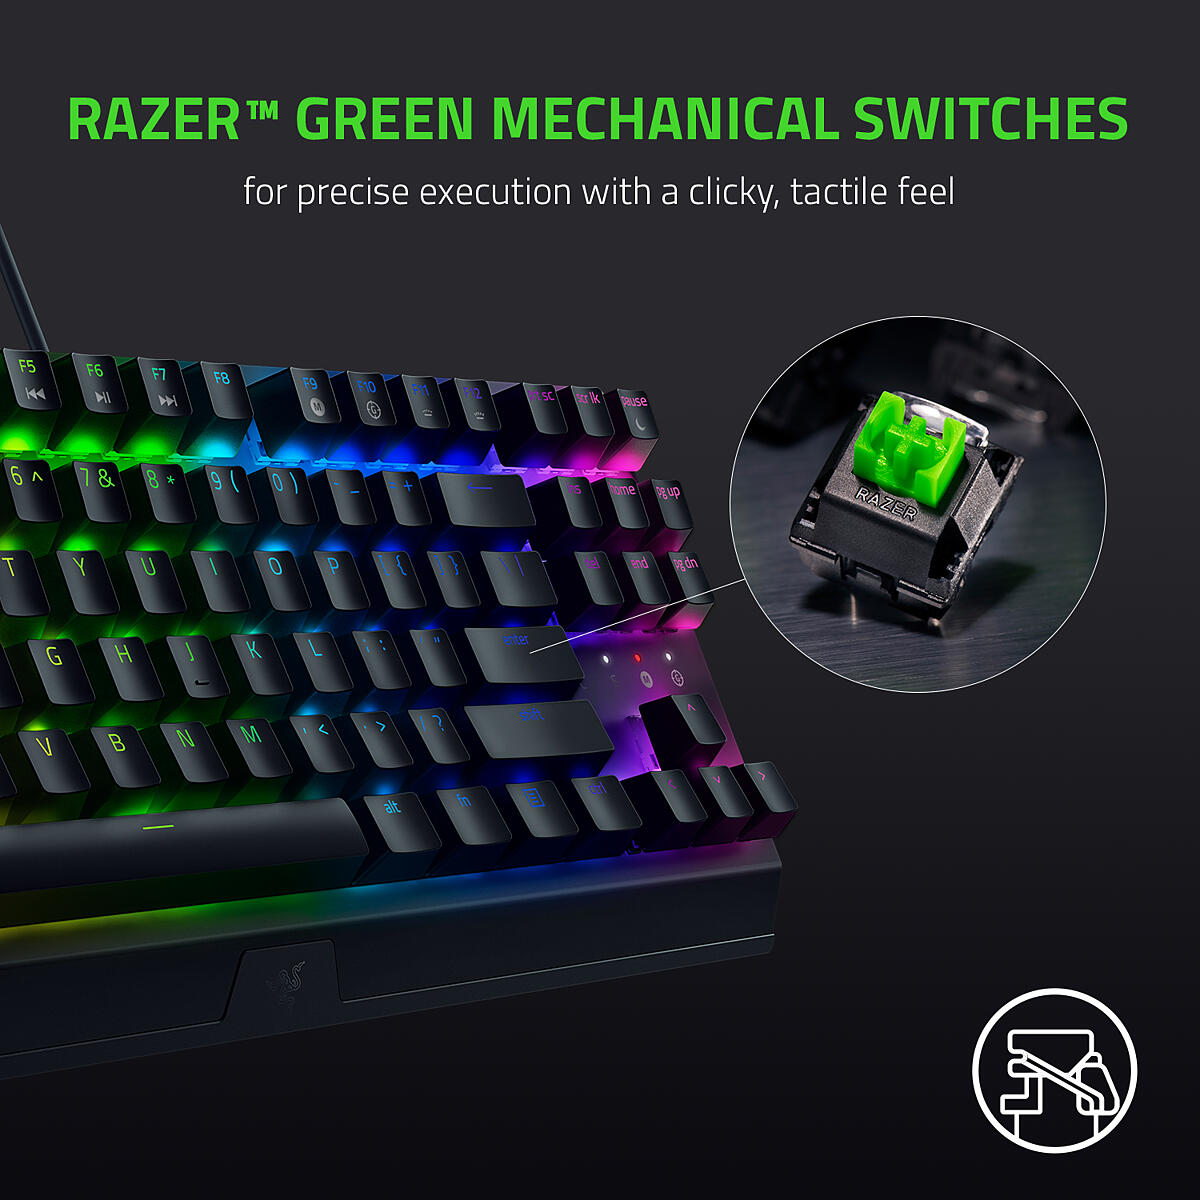 Razer Green Mechanical Switches for precise with a clicky, tactile feel